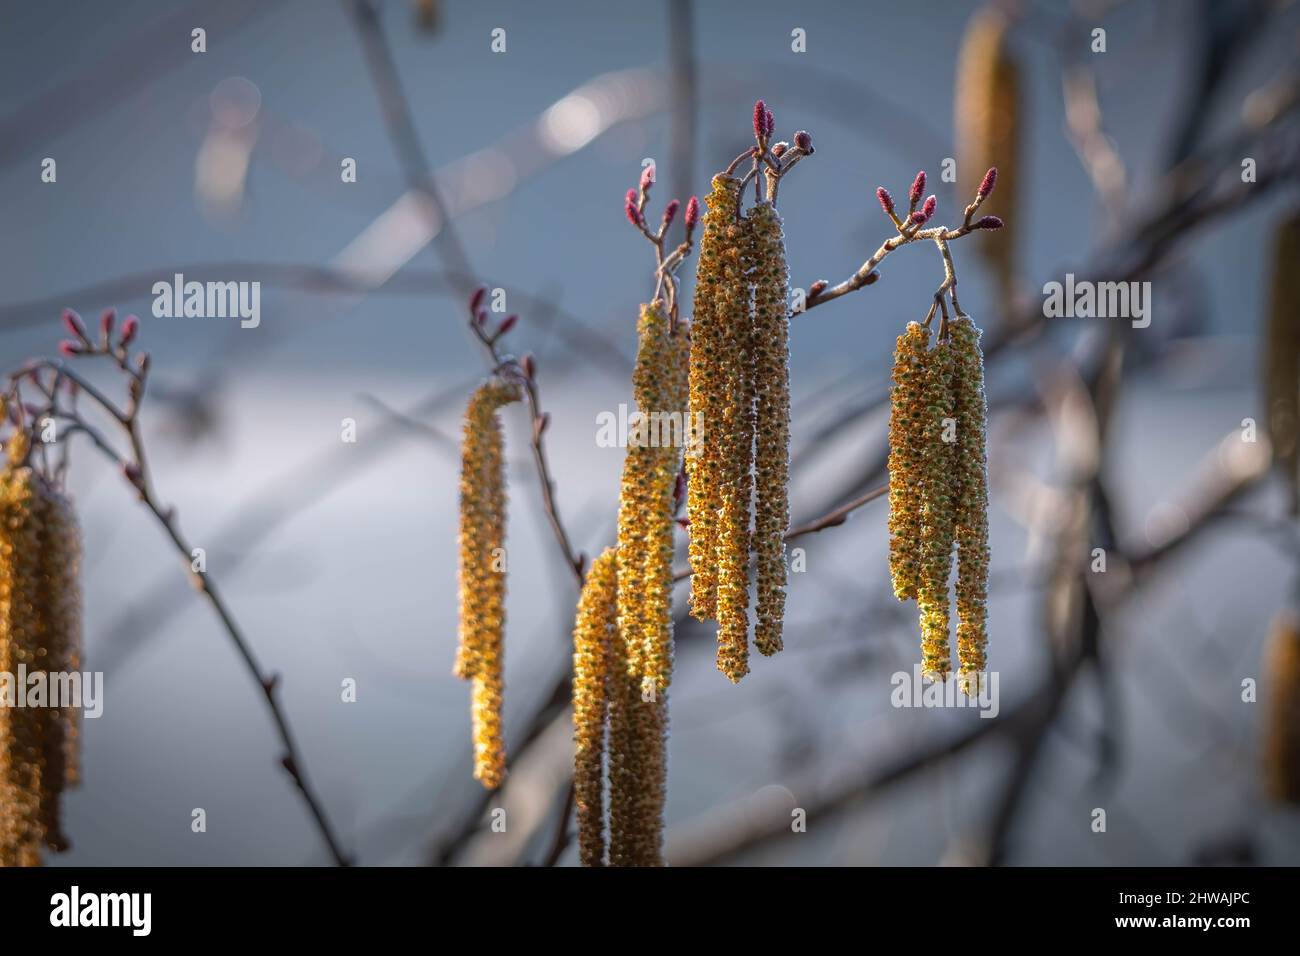 Colorful catkins of the Smooth Alder tree is a sign that Spring is around the corner. Garner, North Carolina. Stock Photo